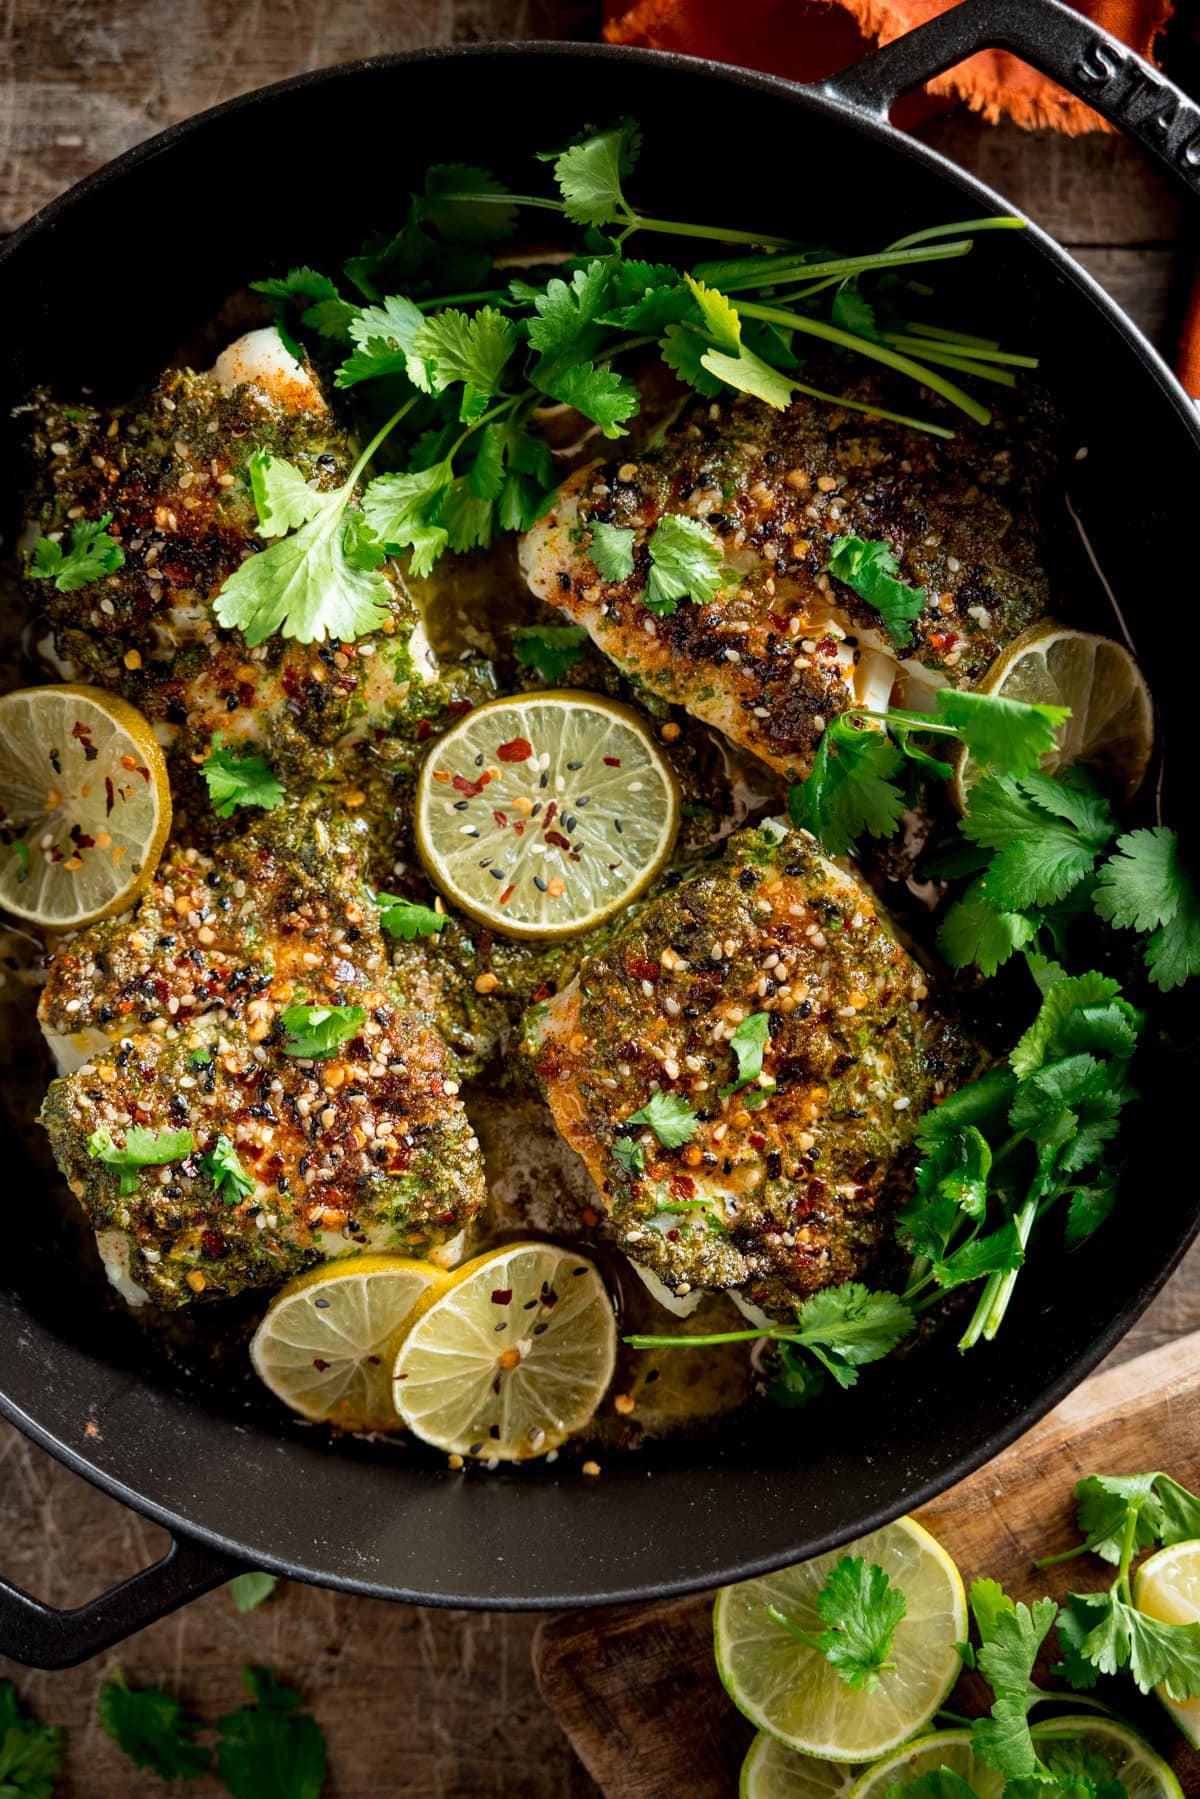 A pan full of coriander lime cod bake, garnished with parsley and slices of lemon on a table